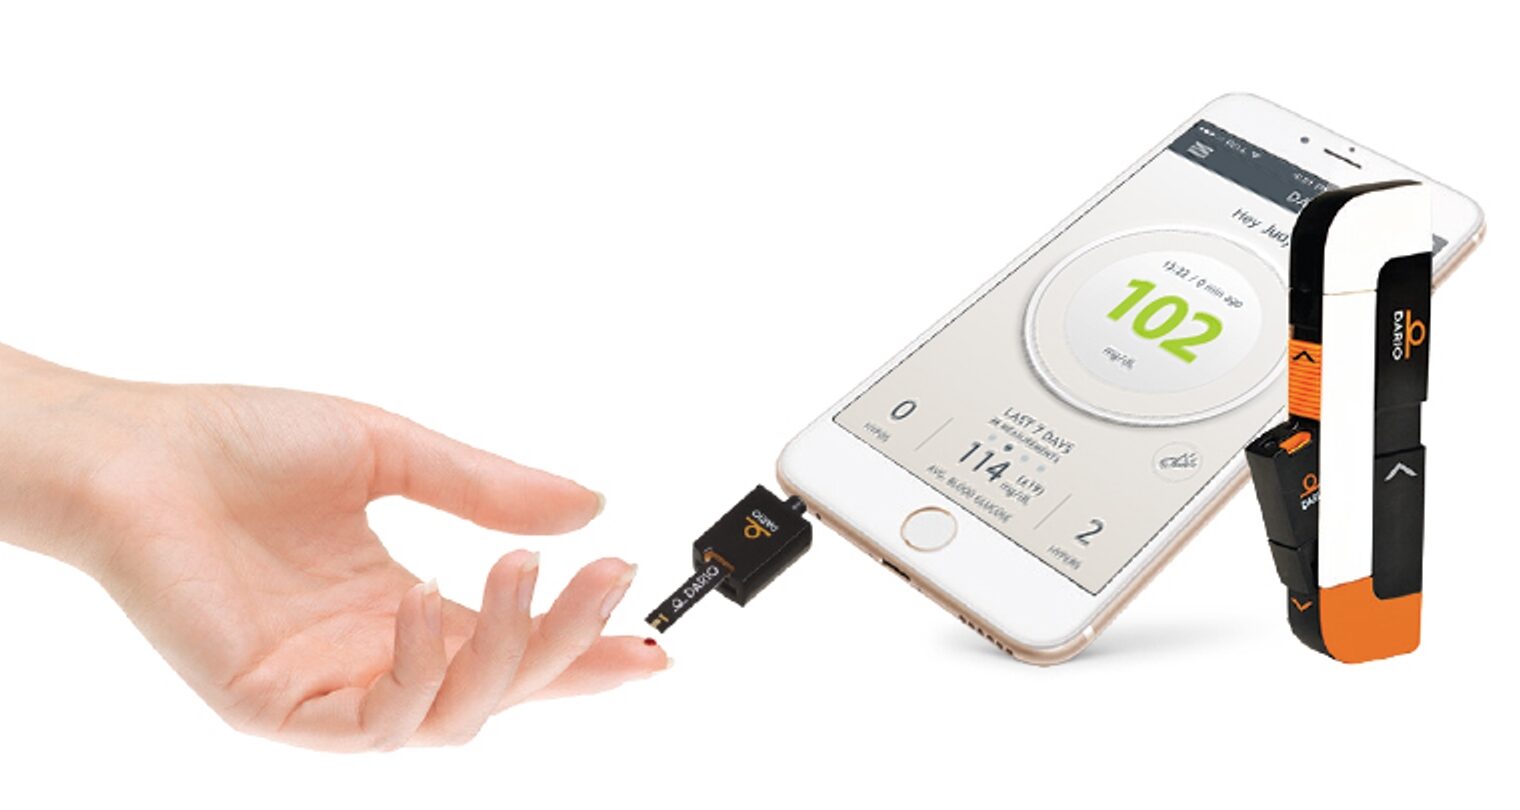 Device and app turn your smartphone into a complete diabetes management system. Photo courtesy of DarioHealth